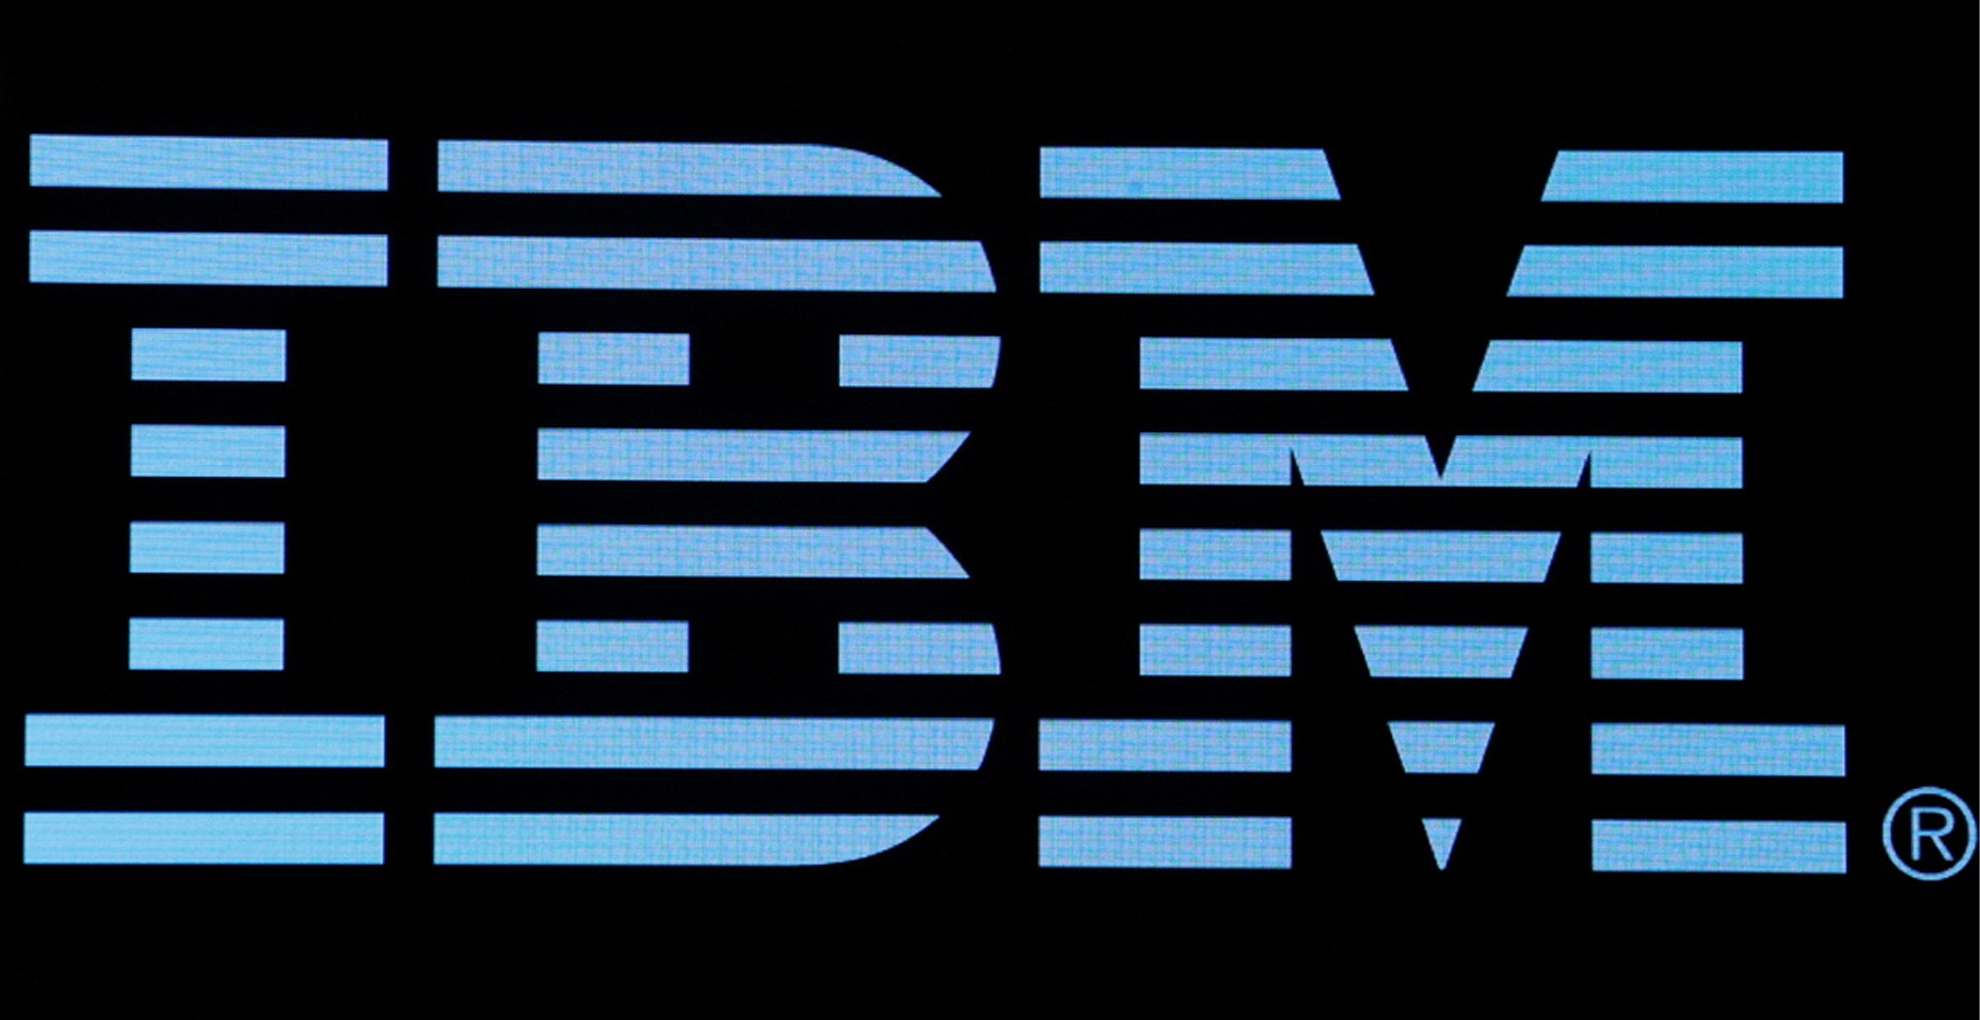 IBM demonstrates the outstanding capabilities of AI, hybrid cloud